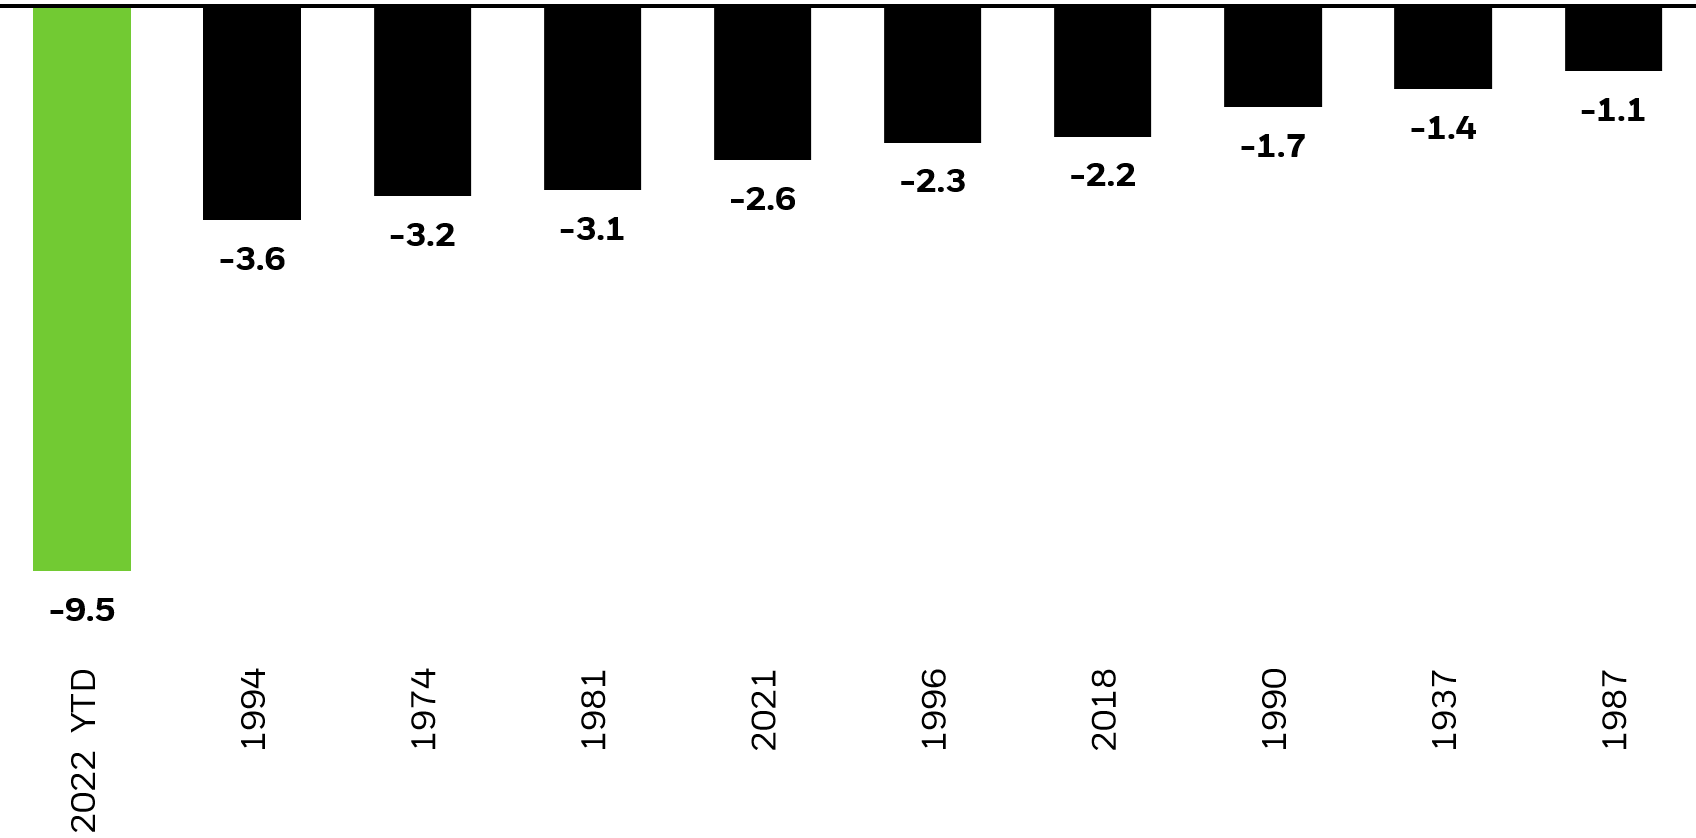 Bar chart showing the total return of the bond market through April 30th for the ten calendar years since 1926 in which performance through April 30th was most negative.